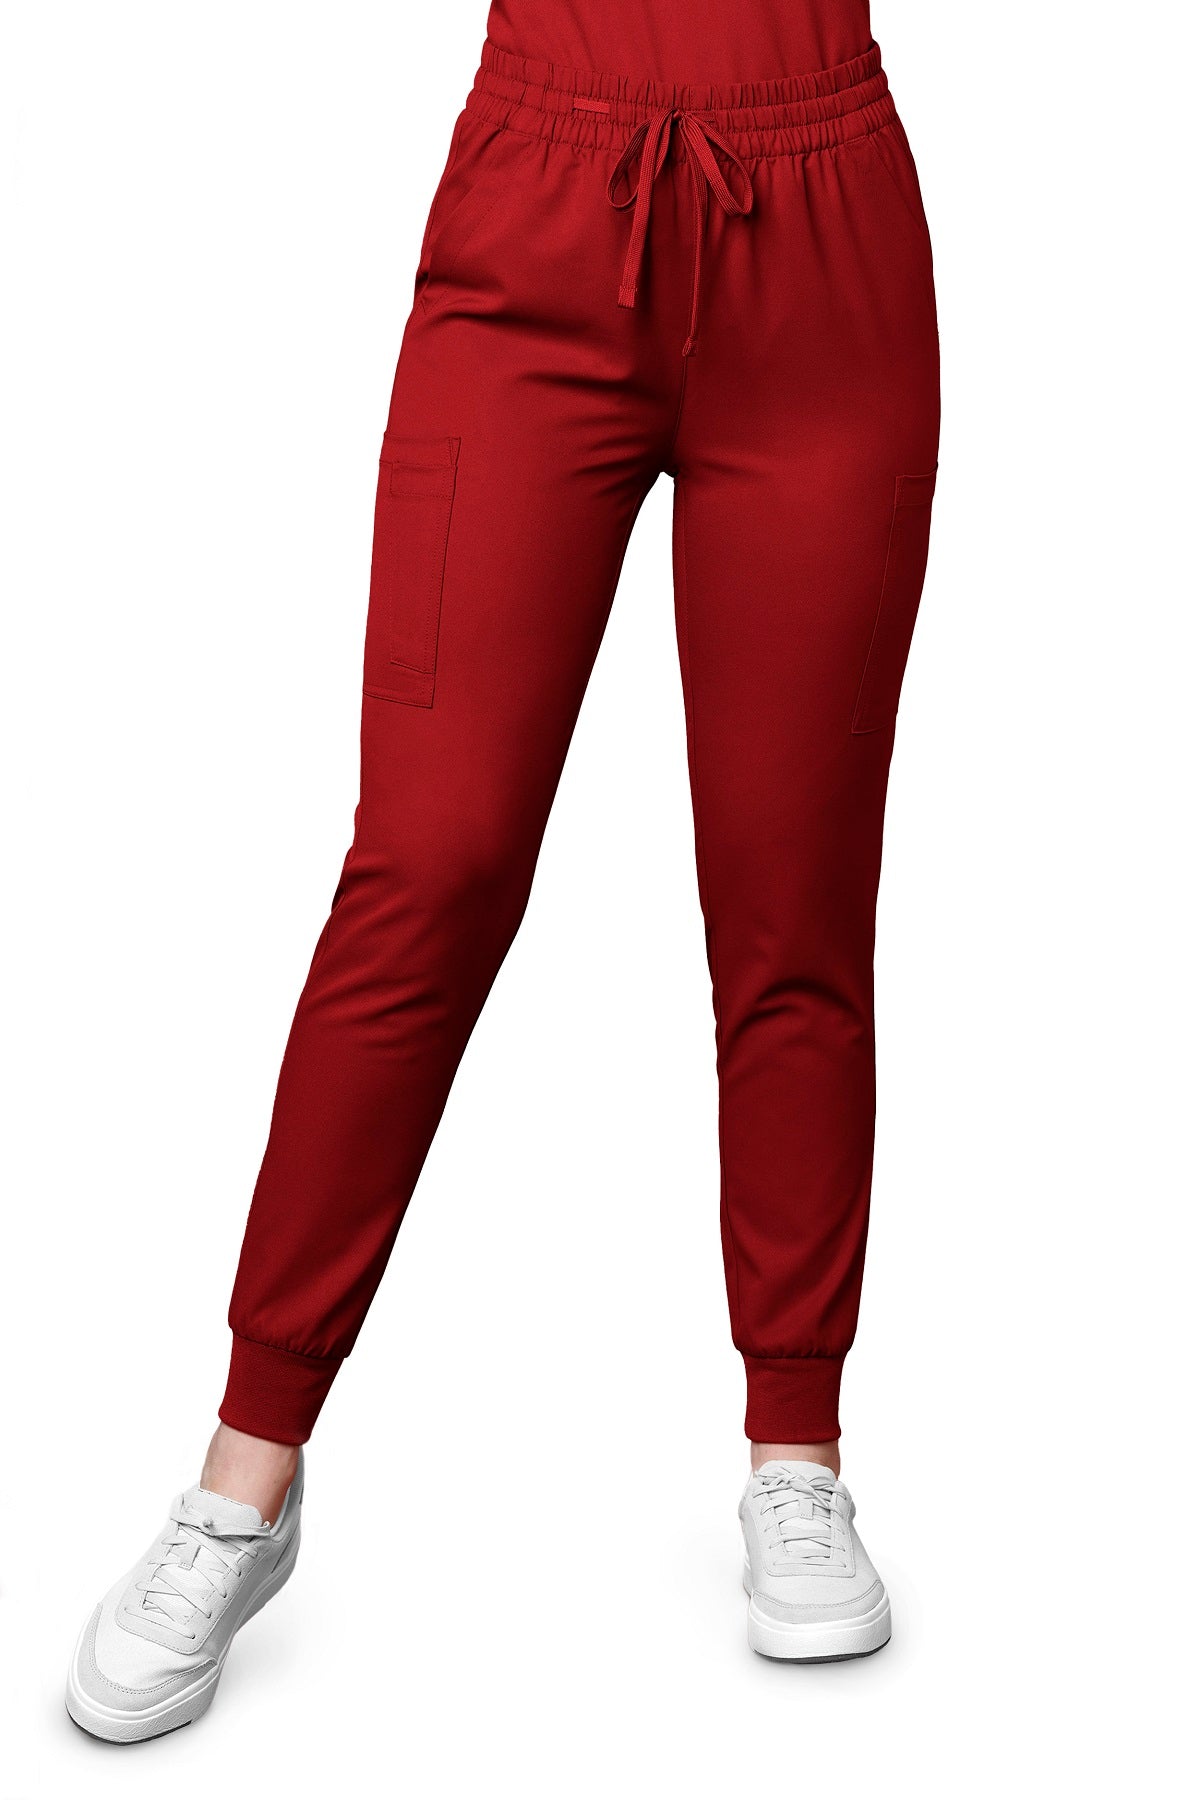 WonderWink Scrub Pants Thrive Jogger regular length in burgundy at Parker's Clothing and Shoes.